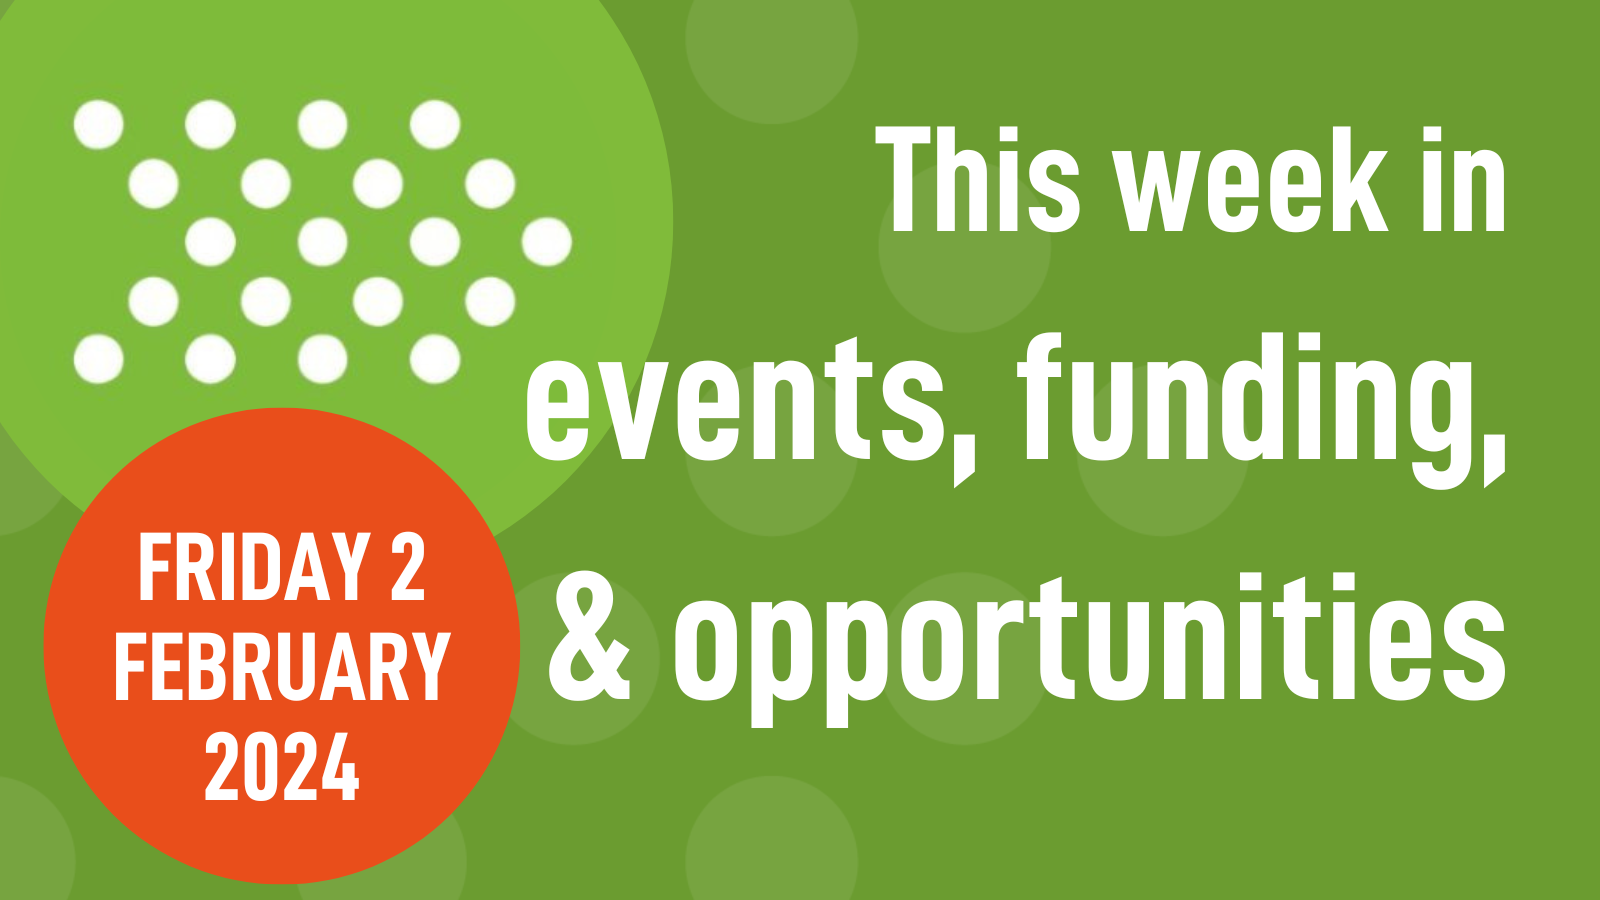 Weekly roundup 02/02/24: events, funding, & opportunities in mental health research